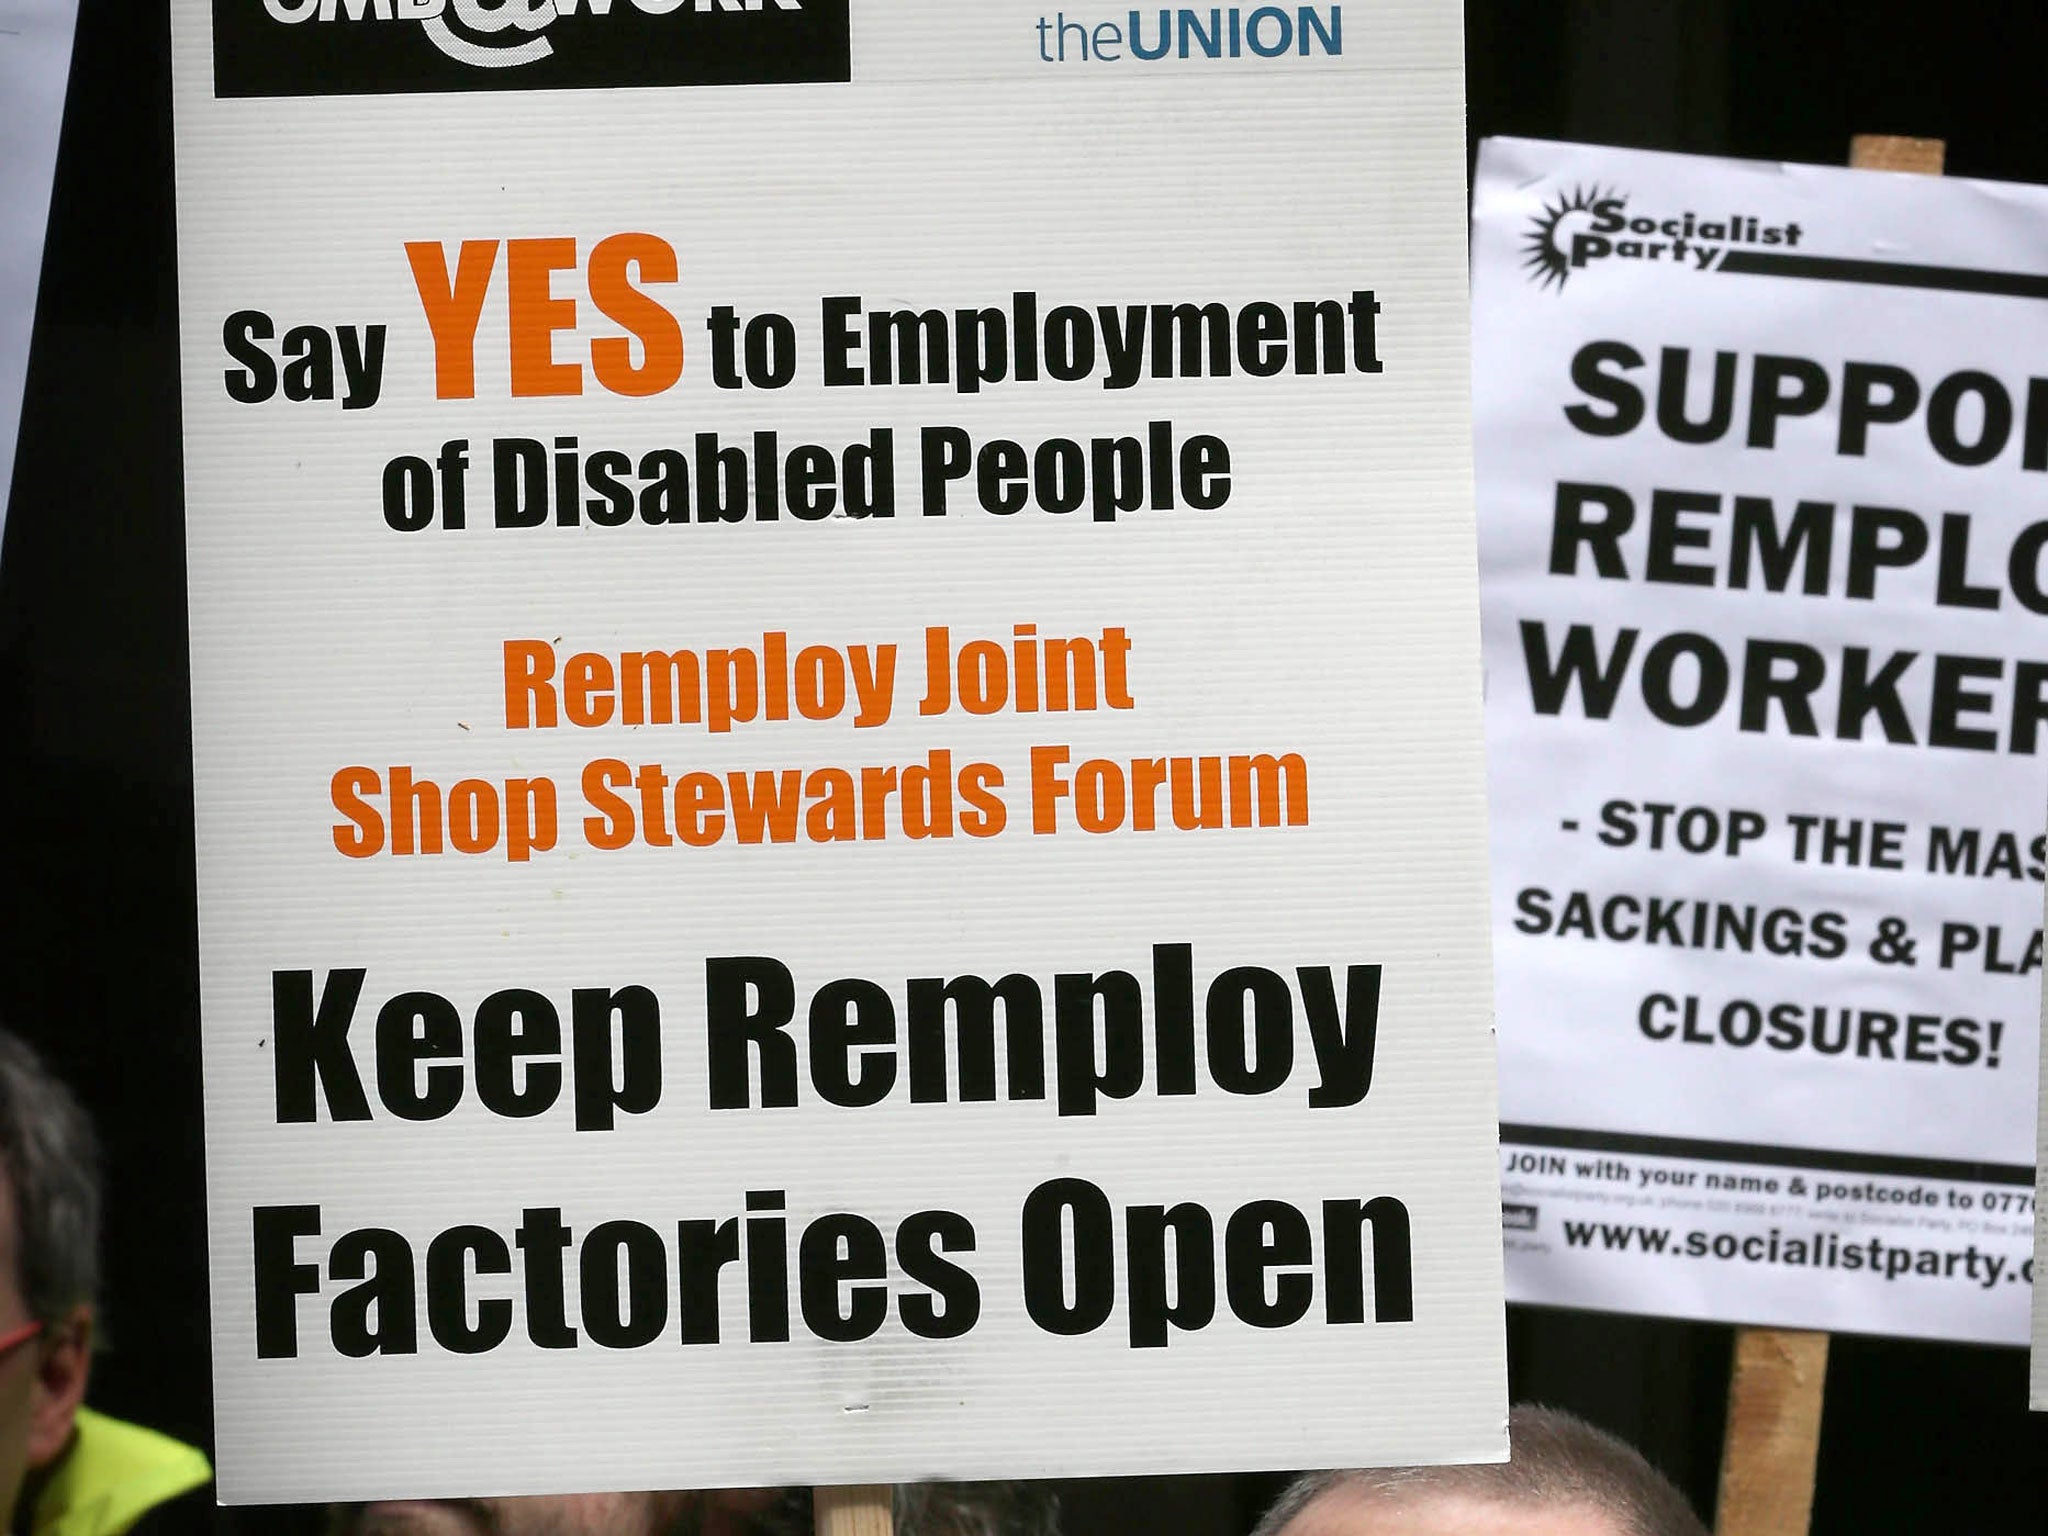 Banners from a protest in April this year demanding that Remploy factories stay open